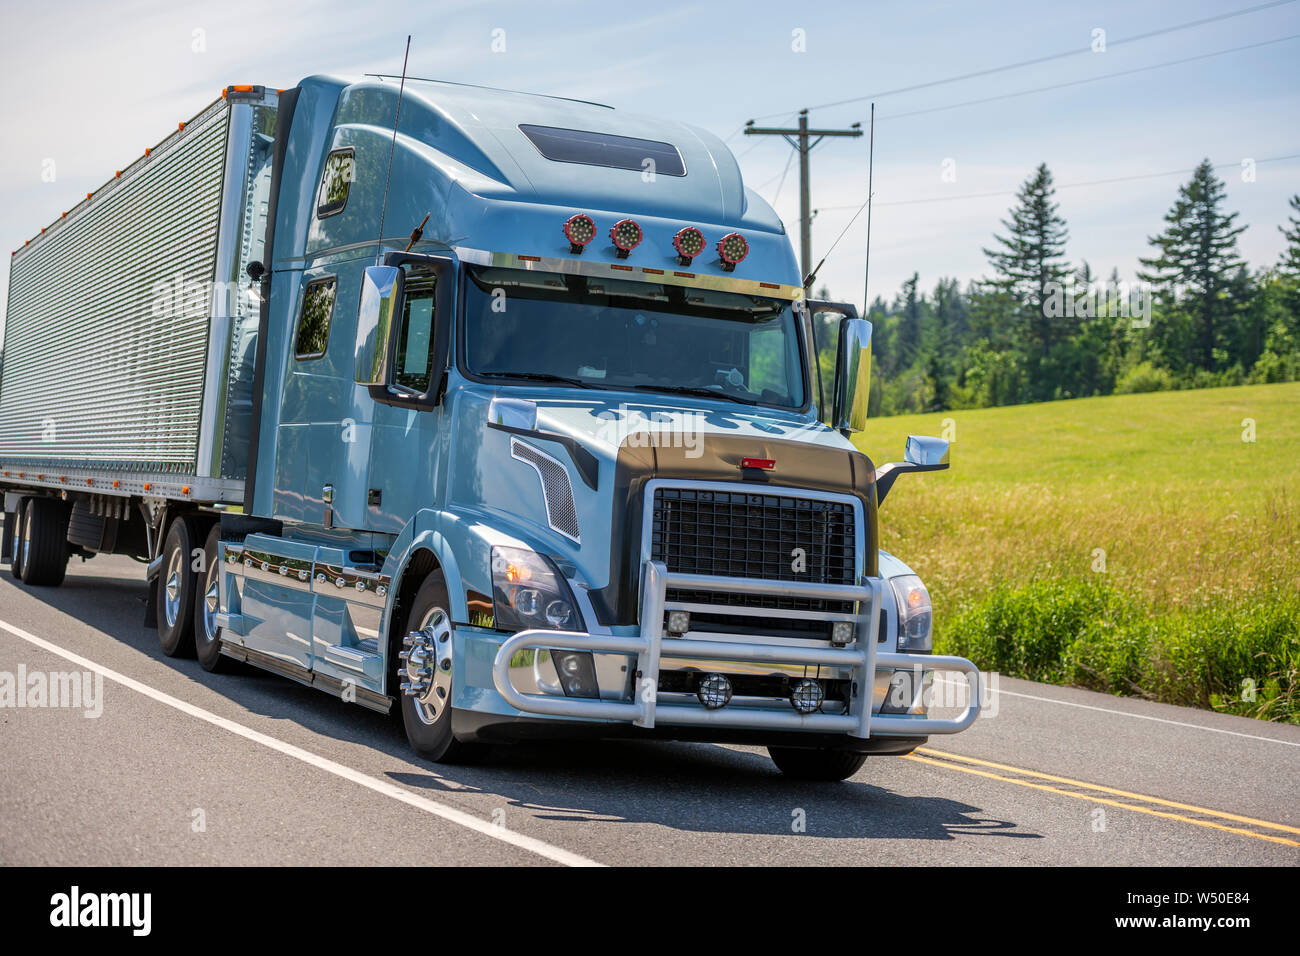 Big rig bonnet long haul blue semi truck with grille guard and chrome accessories transporting frozen commercial cargo in grooved refrigerated semi tr Stock Photo